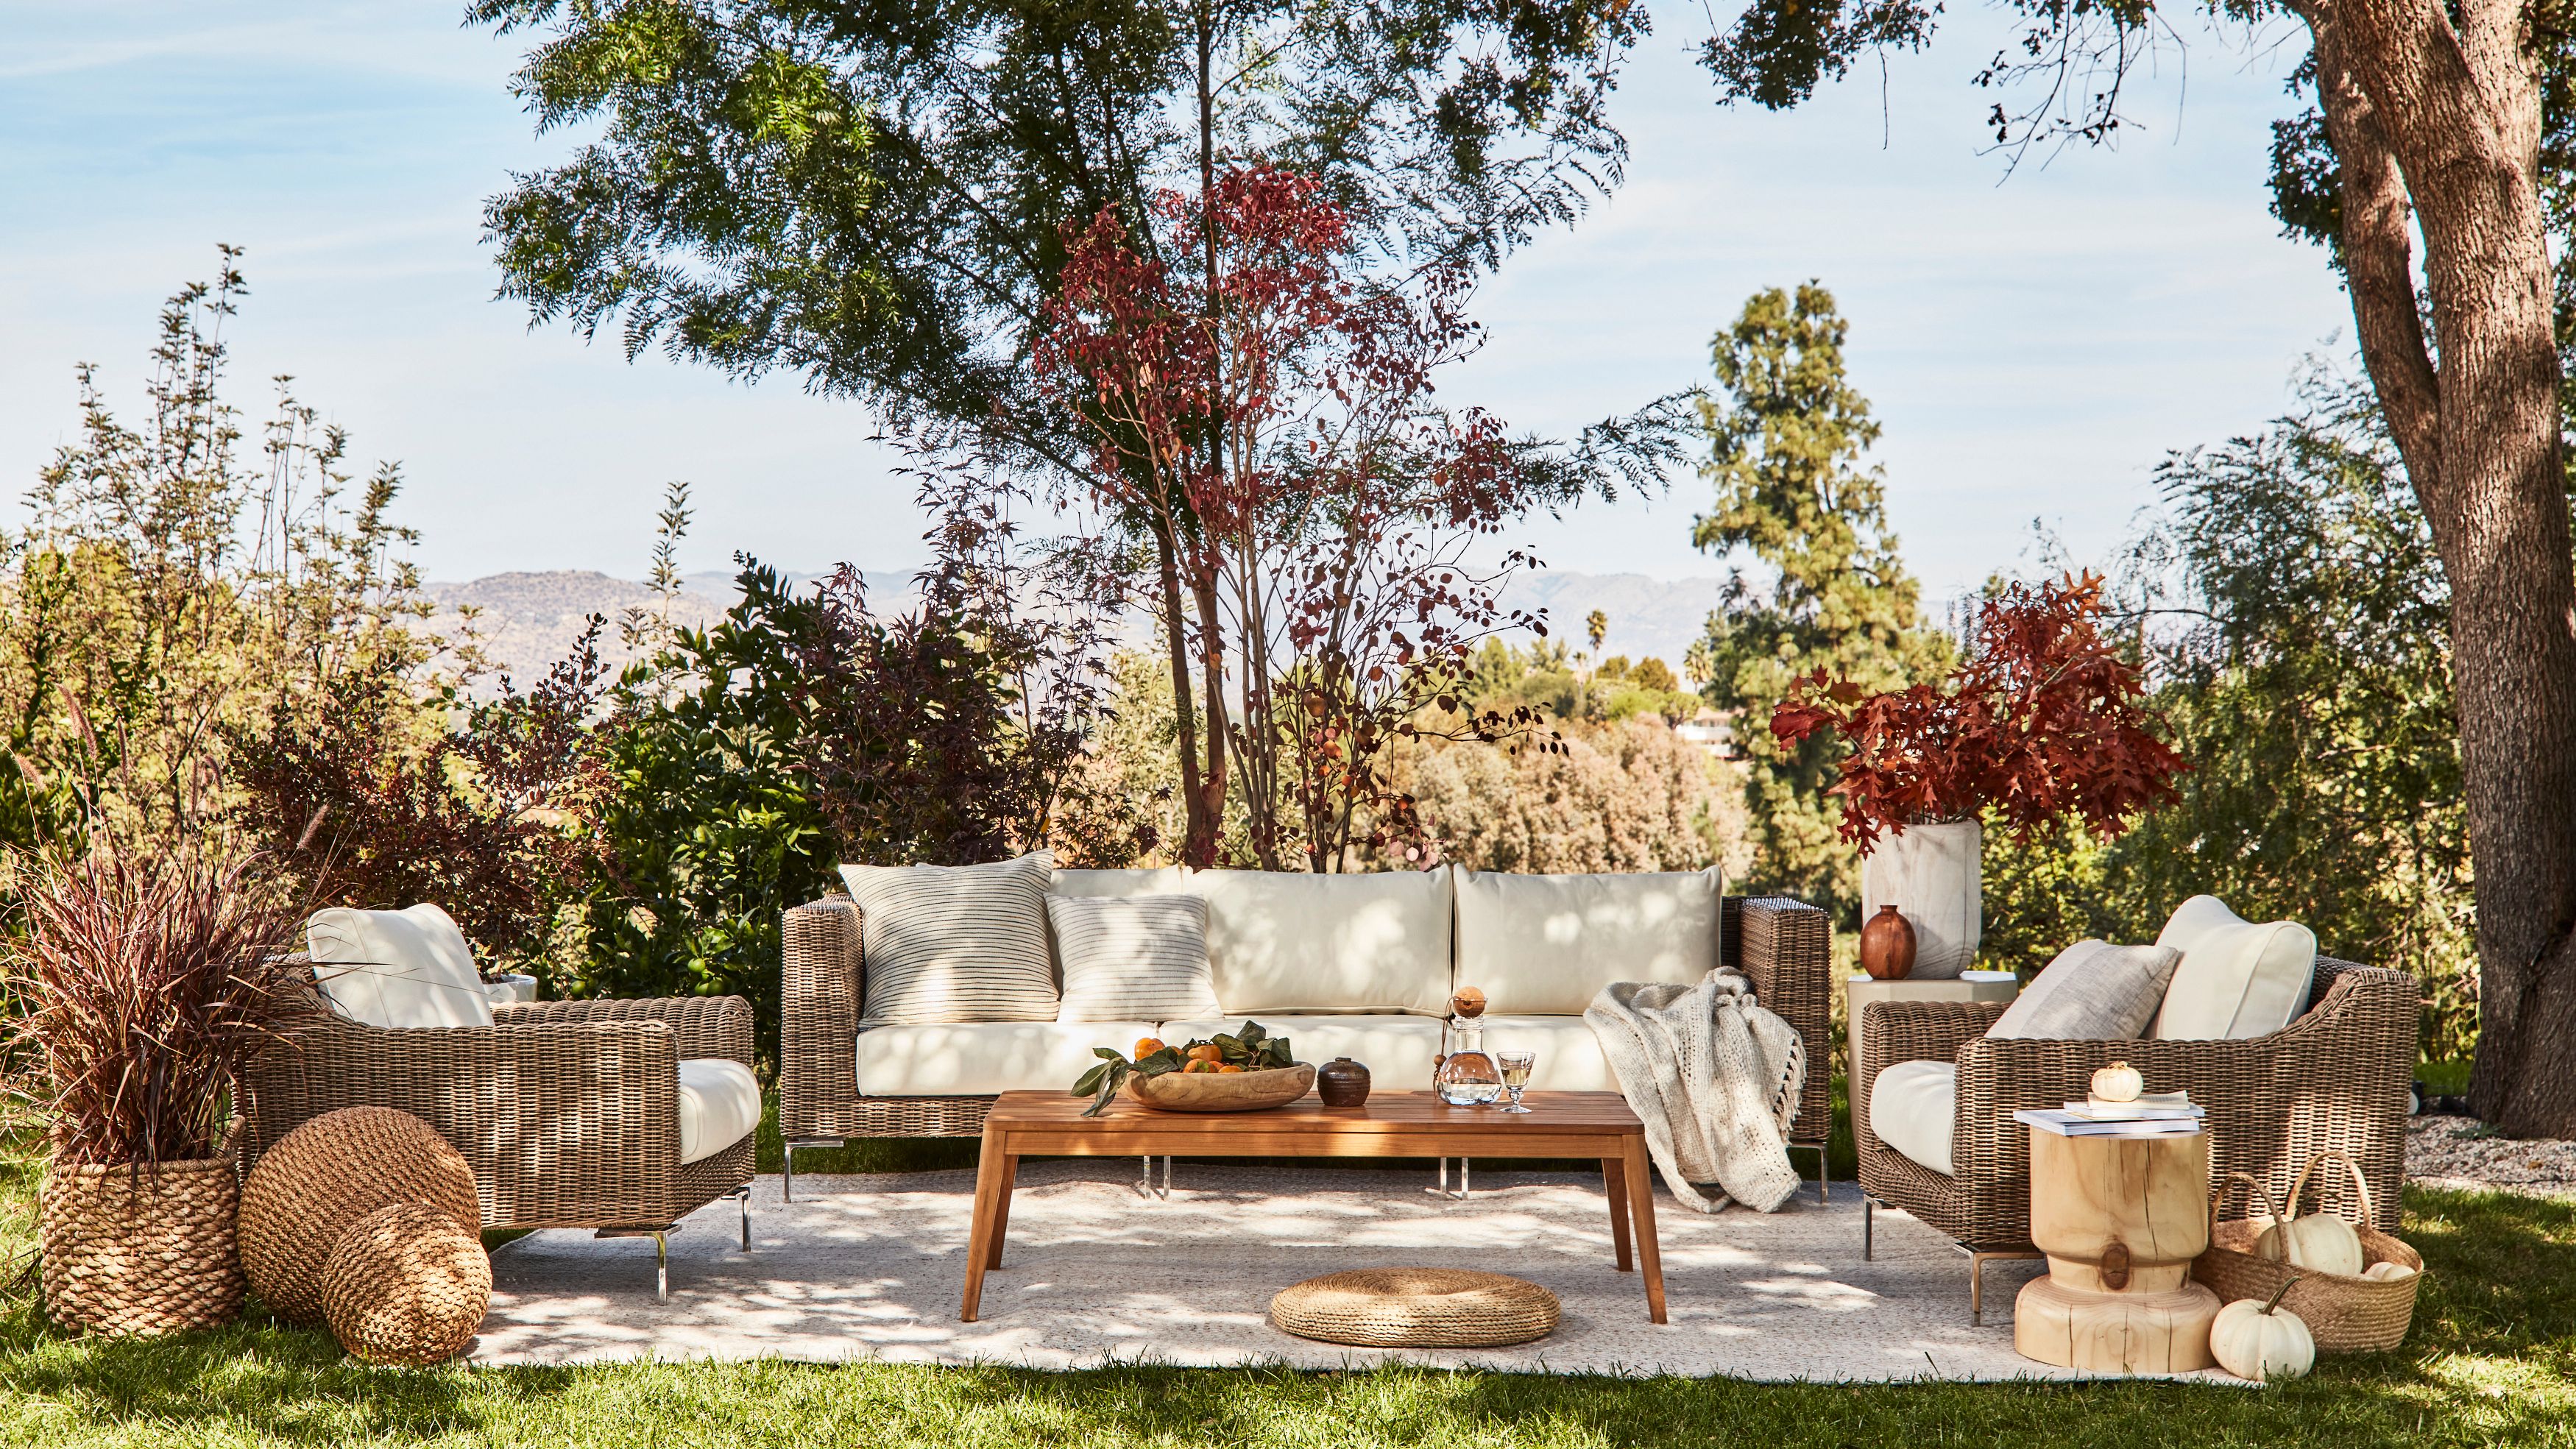 Outer Furniture review: We tested the wicker outdoor sofa